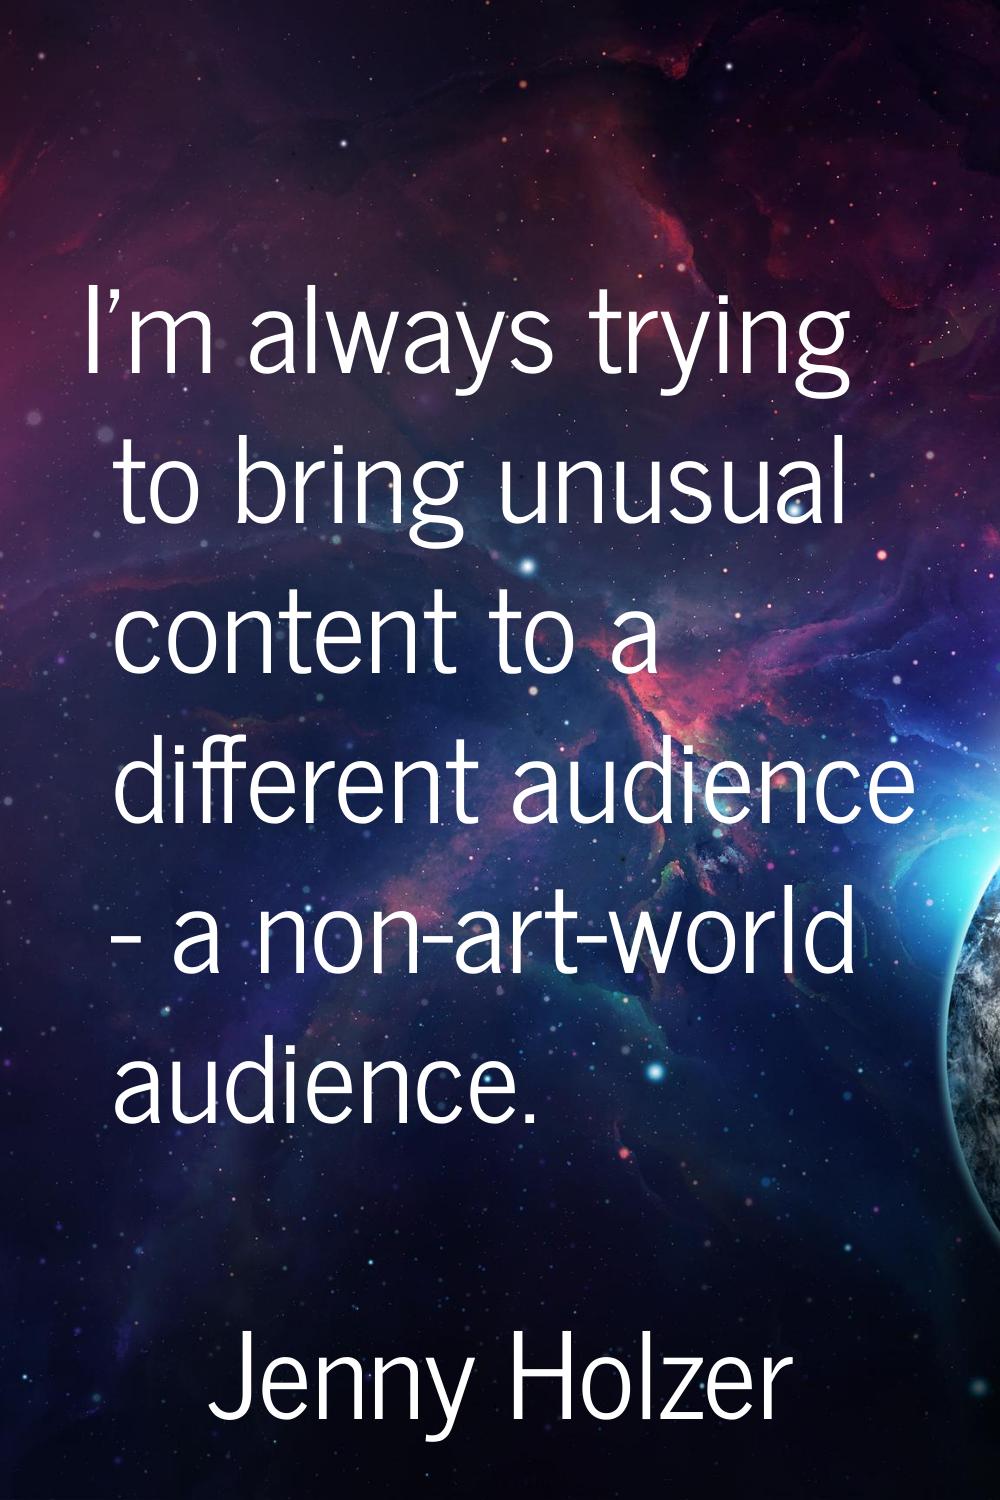 I'm always trying to bring unusual content to a different audience - a non-art-world audience.